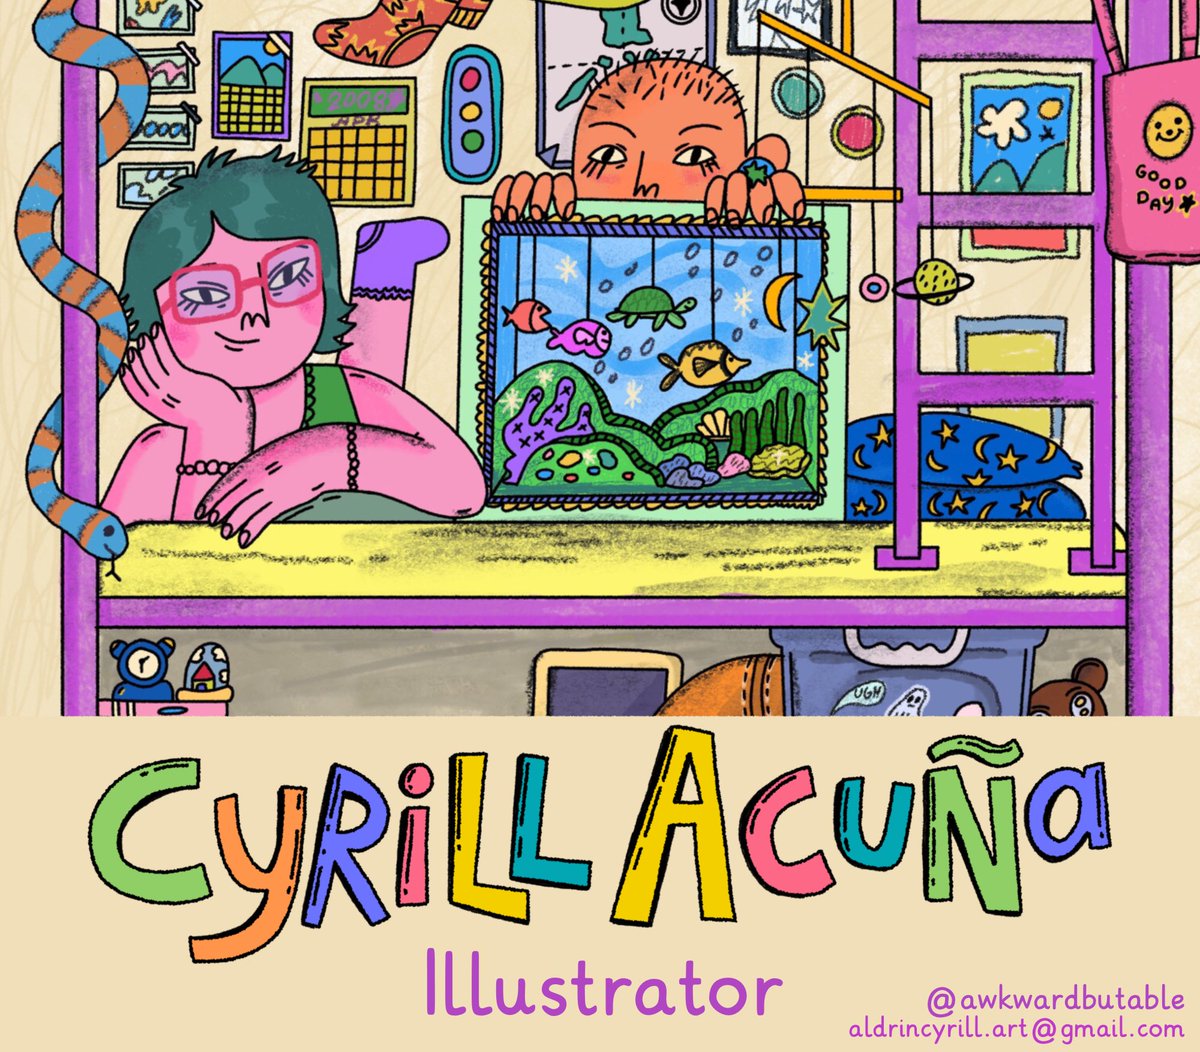 Happy #KidLitArtPostcard day 🔆 I'm Cyrill, an illustrator based in the Philippines. I l love to illustrate funny faces and heartfelt characters. I also like lively and whimsical scenery. I'm currently looking for a representation ✿